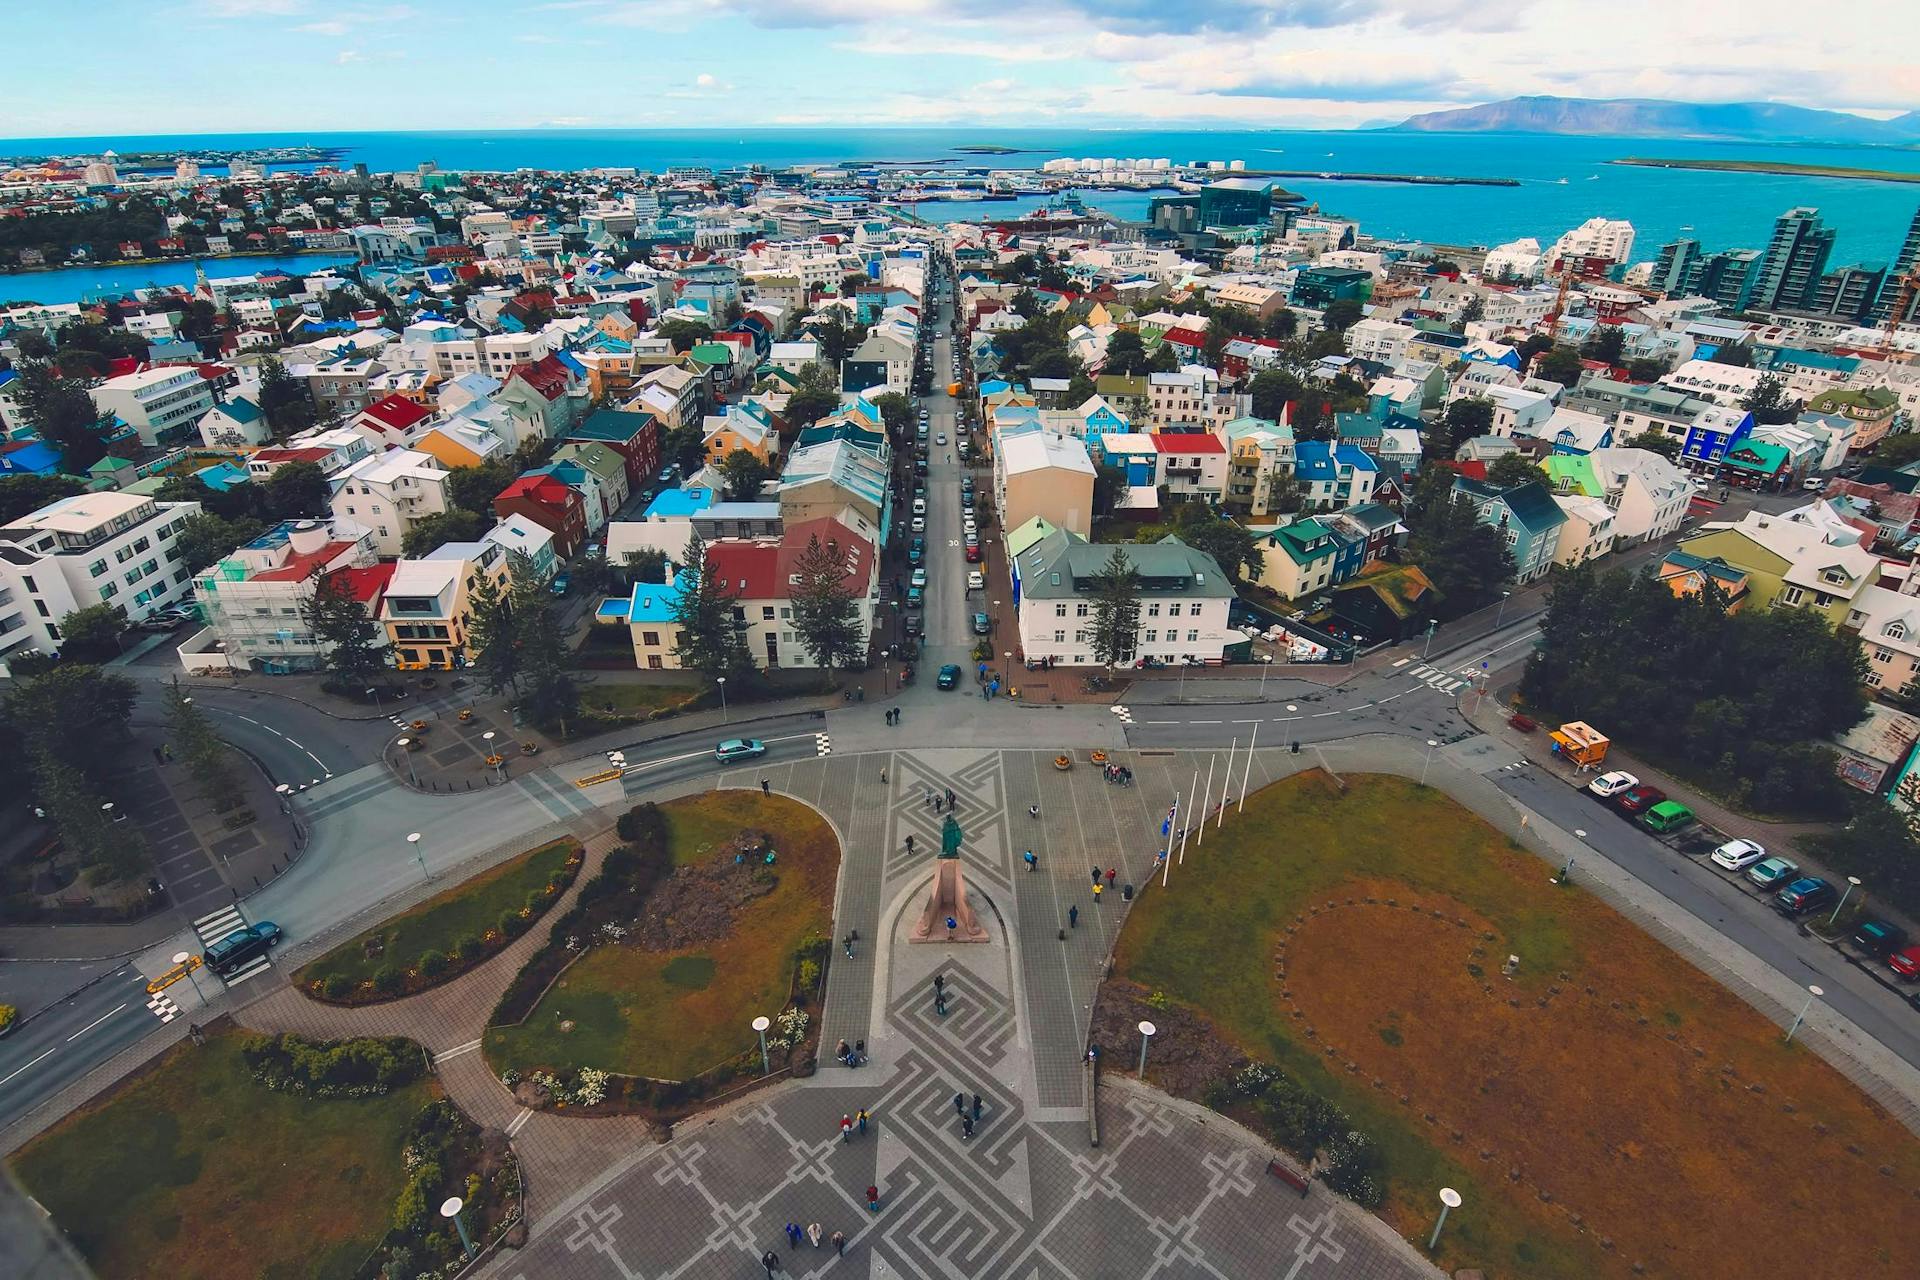 The streets of Reykjavik, as seen from the top of Hallgrimskirkja